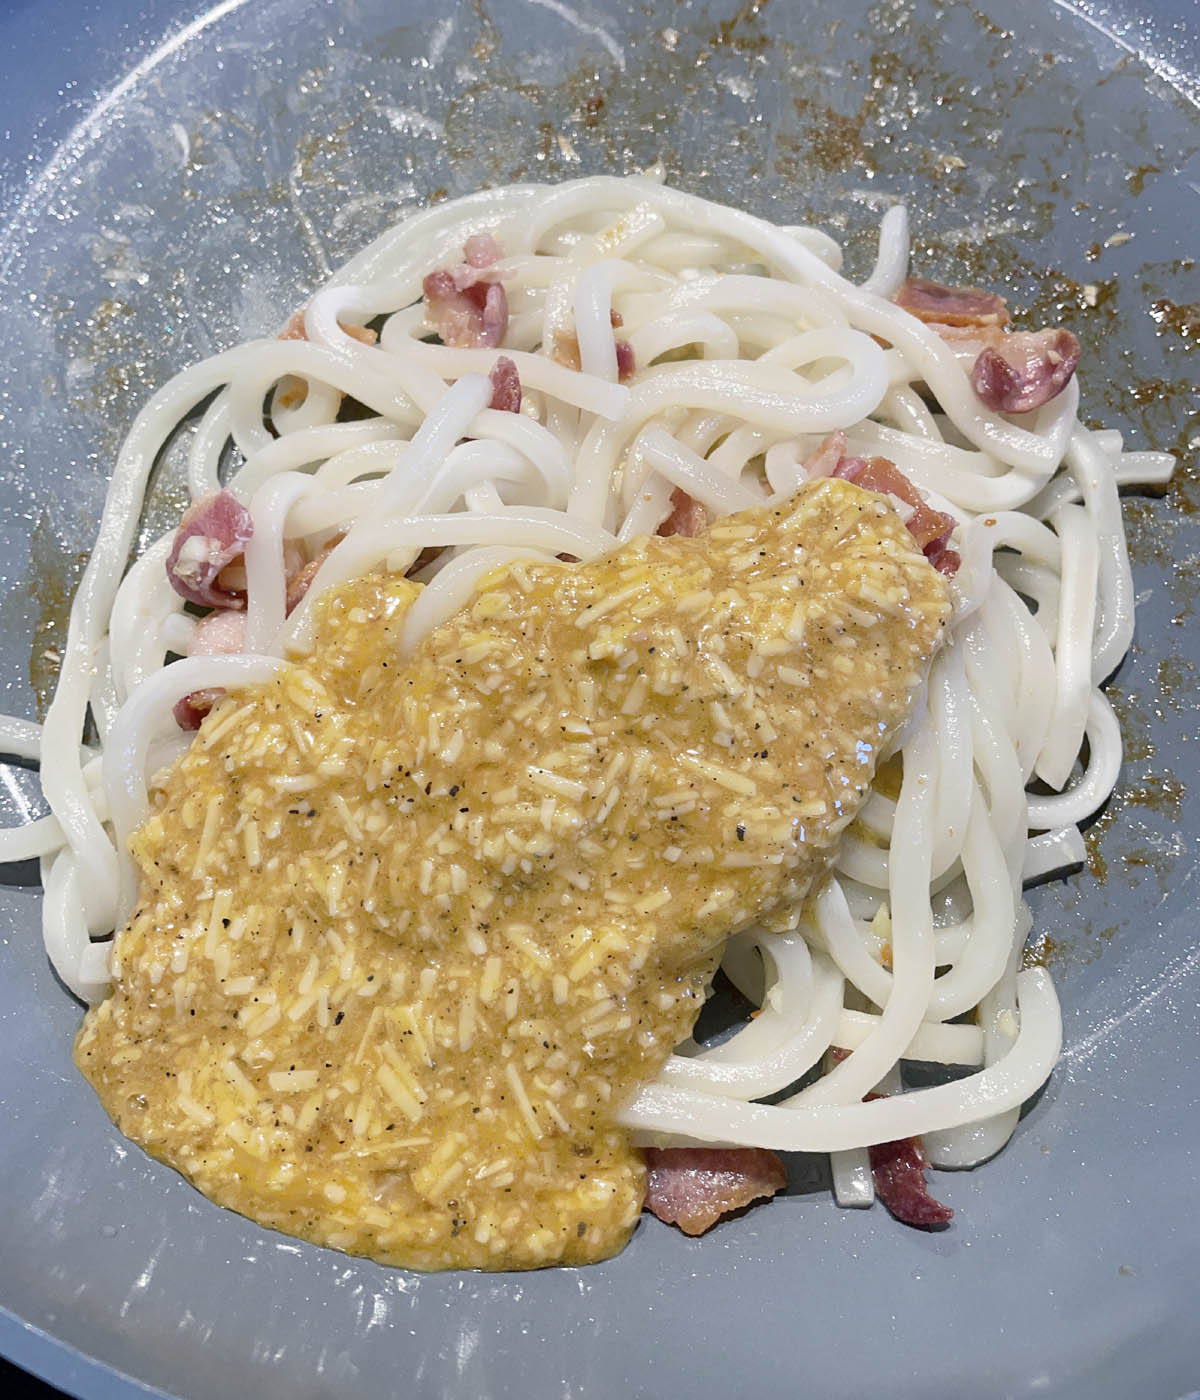 A grey skillet containing cooked bacon pieces, white noodles, and yellow brown sauce.